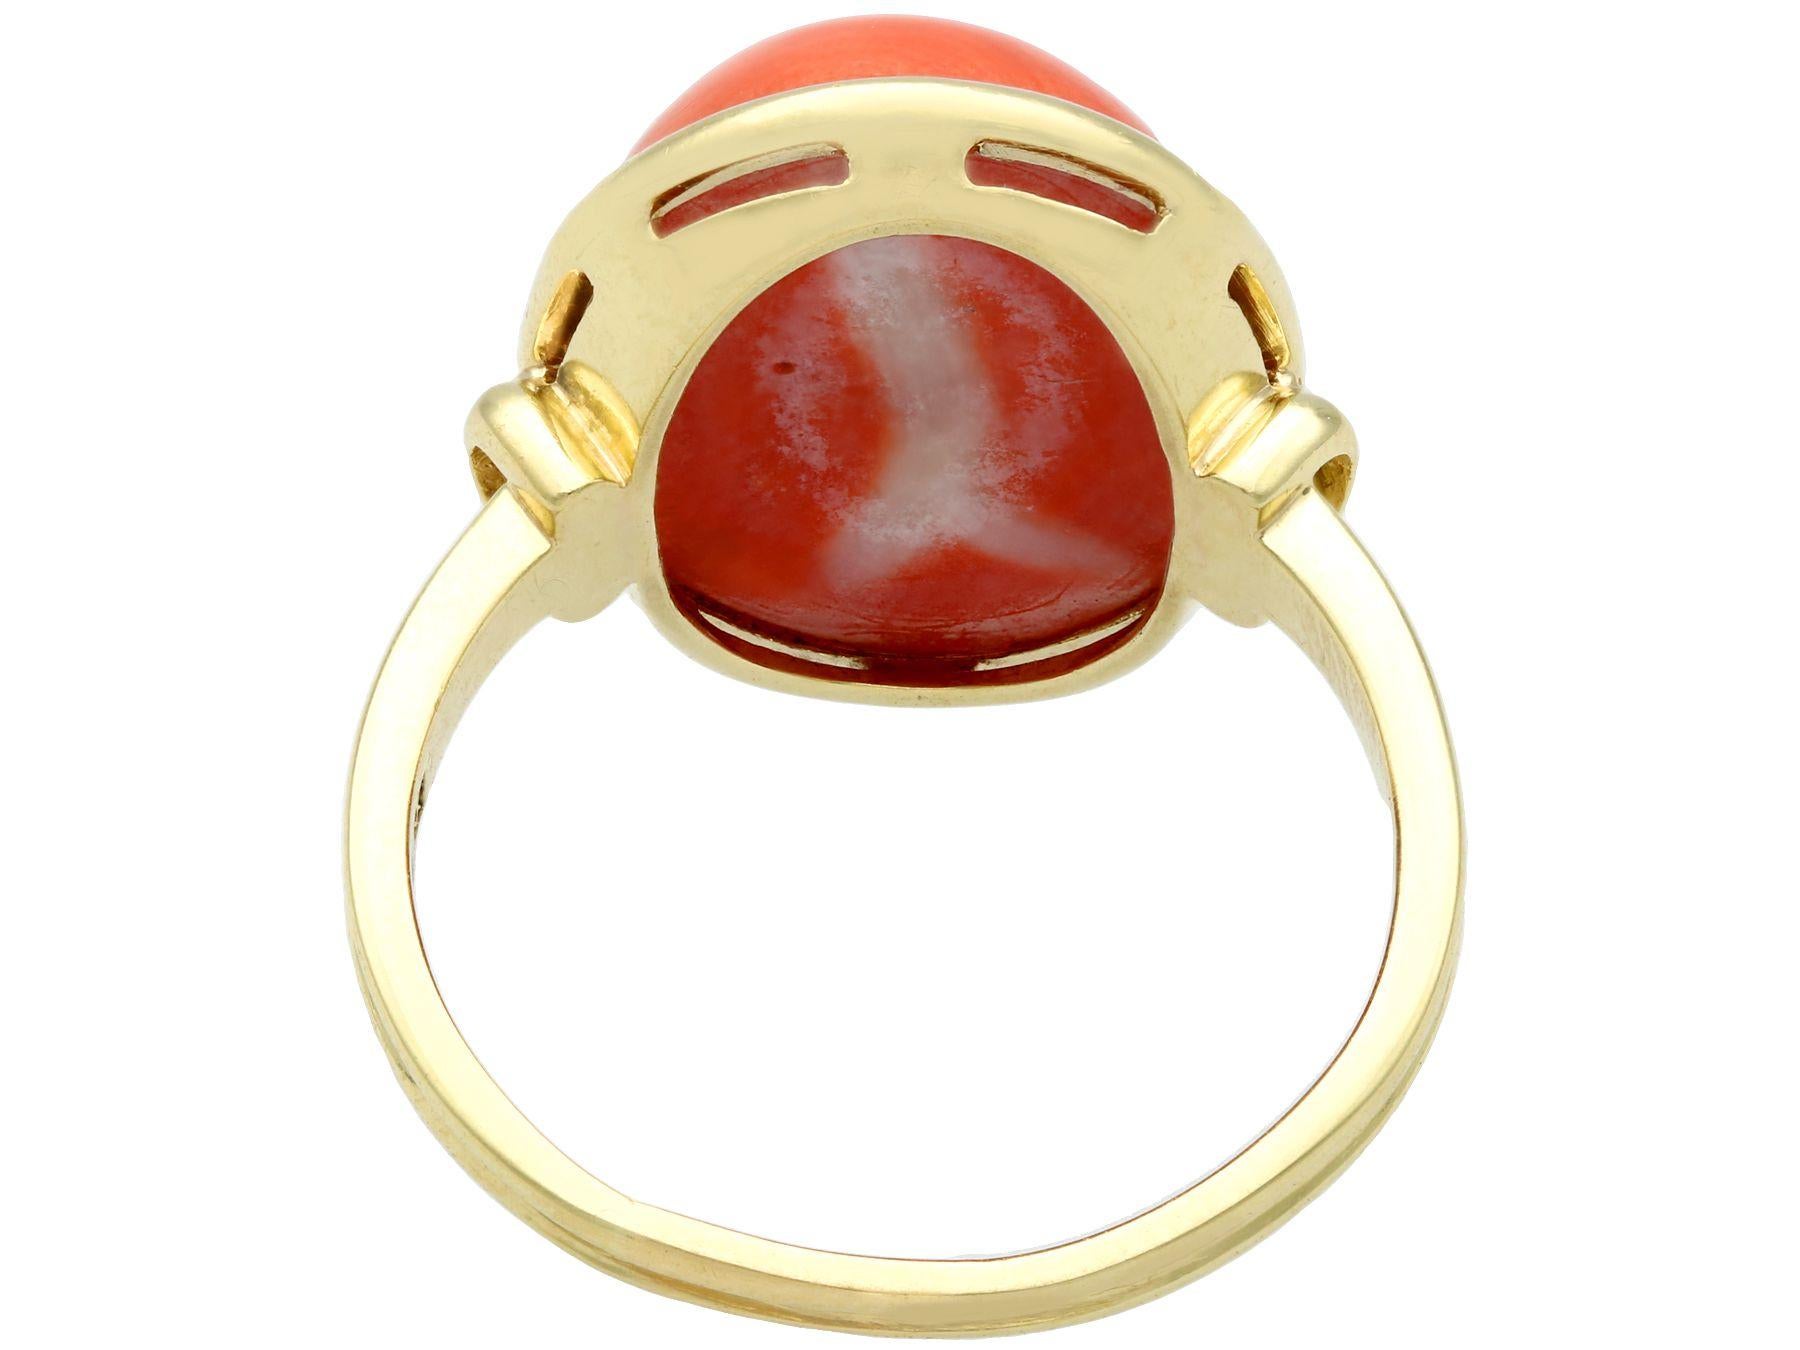 Vintage 13.20 Carat Cabochon Cut Coral and Yellow Gold Ring, Circa 1950 In Excellent Condition For Sale In Jesmond, Newcastle Upon Tyne